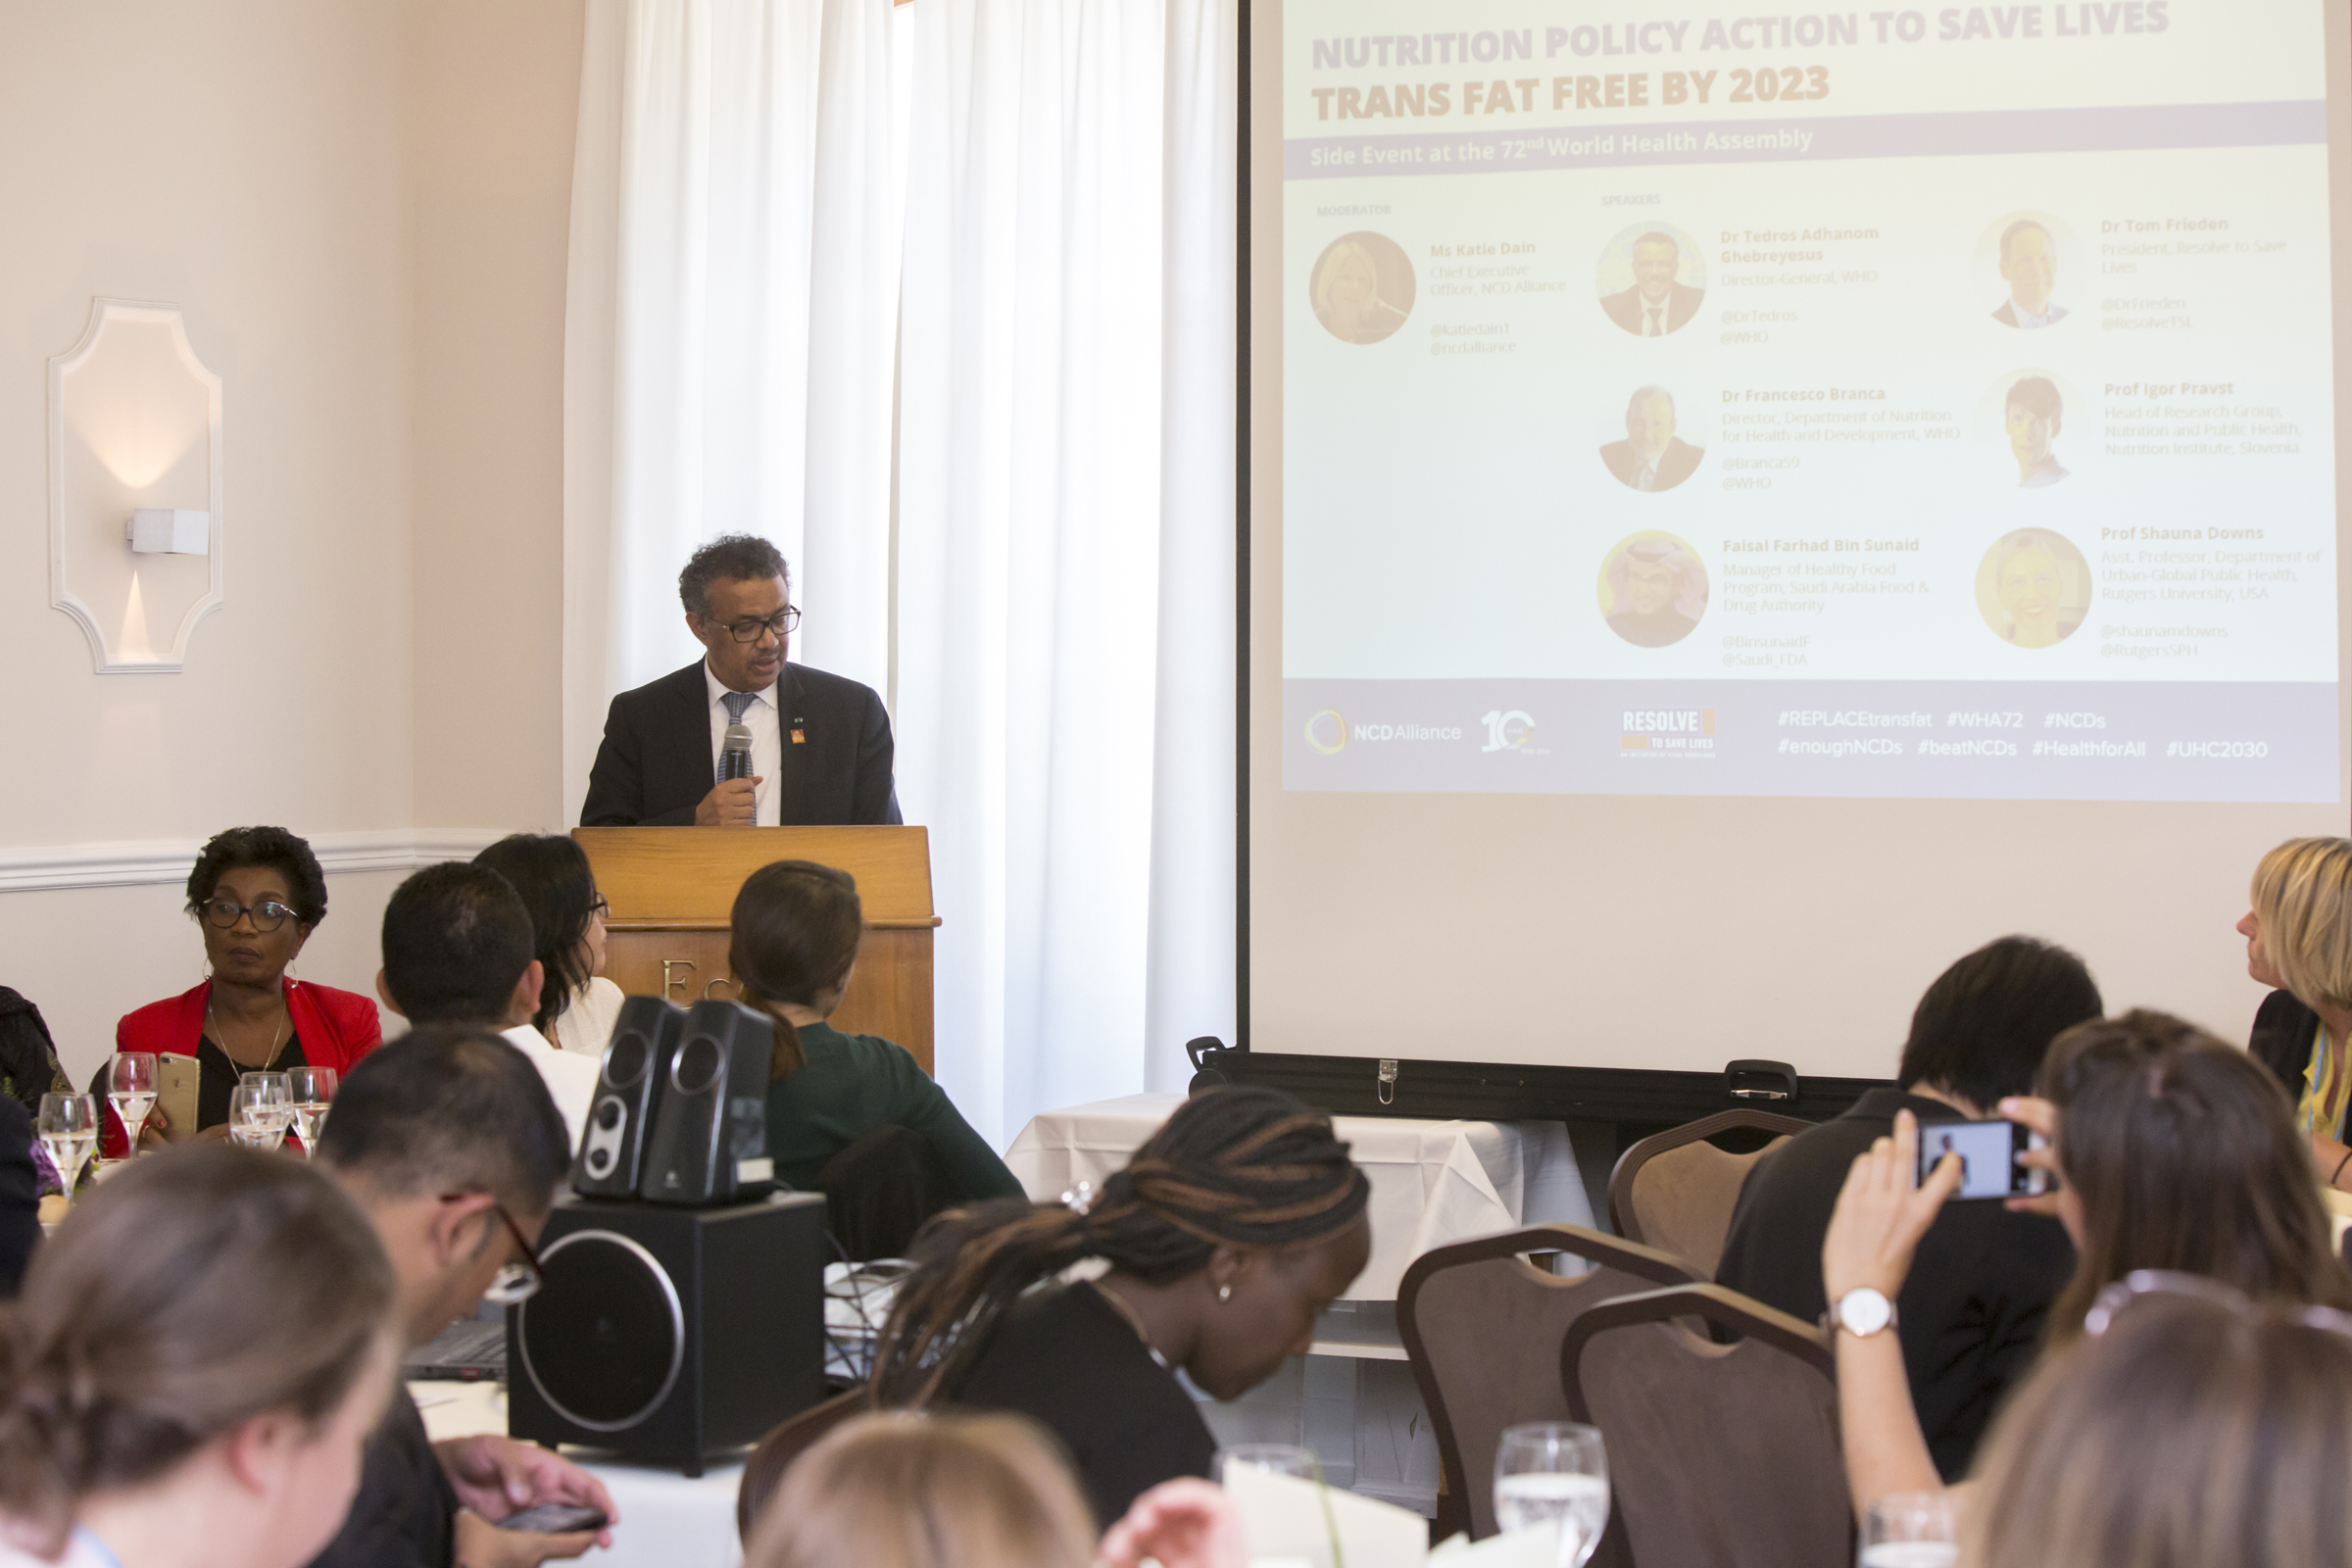 Dr Tedros Adhanom Ghebreyesus, WHO Director General, speaking at the event "Nutrition Policy Action to Save Lives - Trans fat free by 2023"